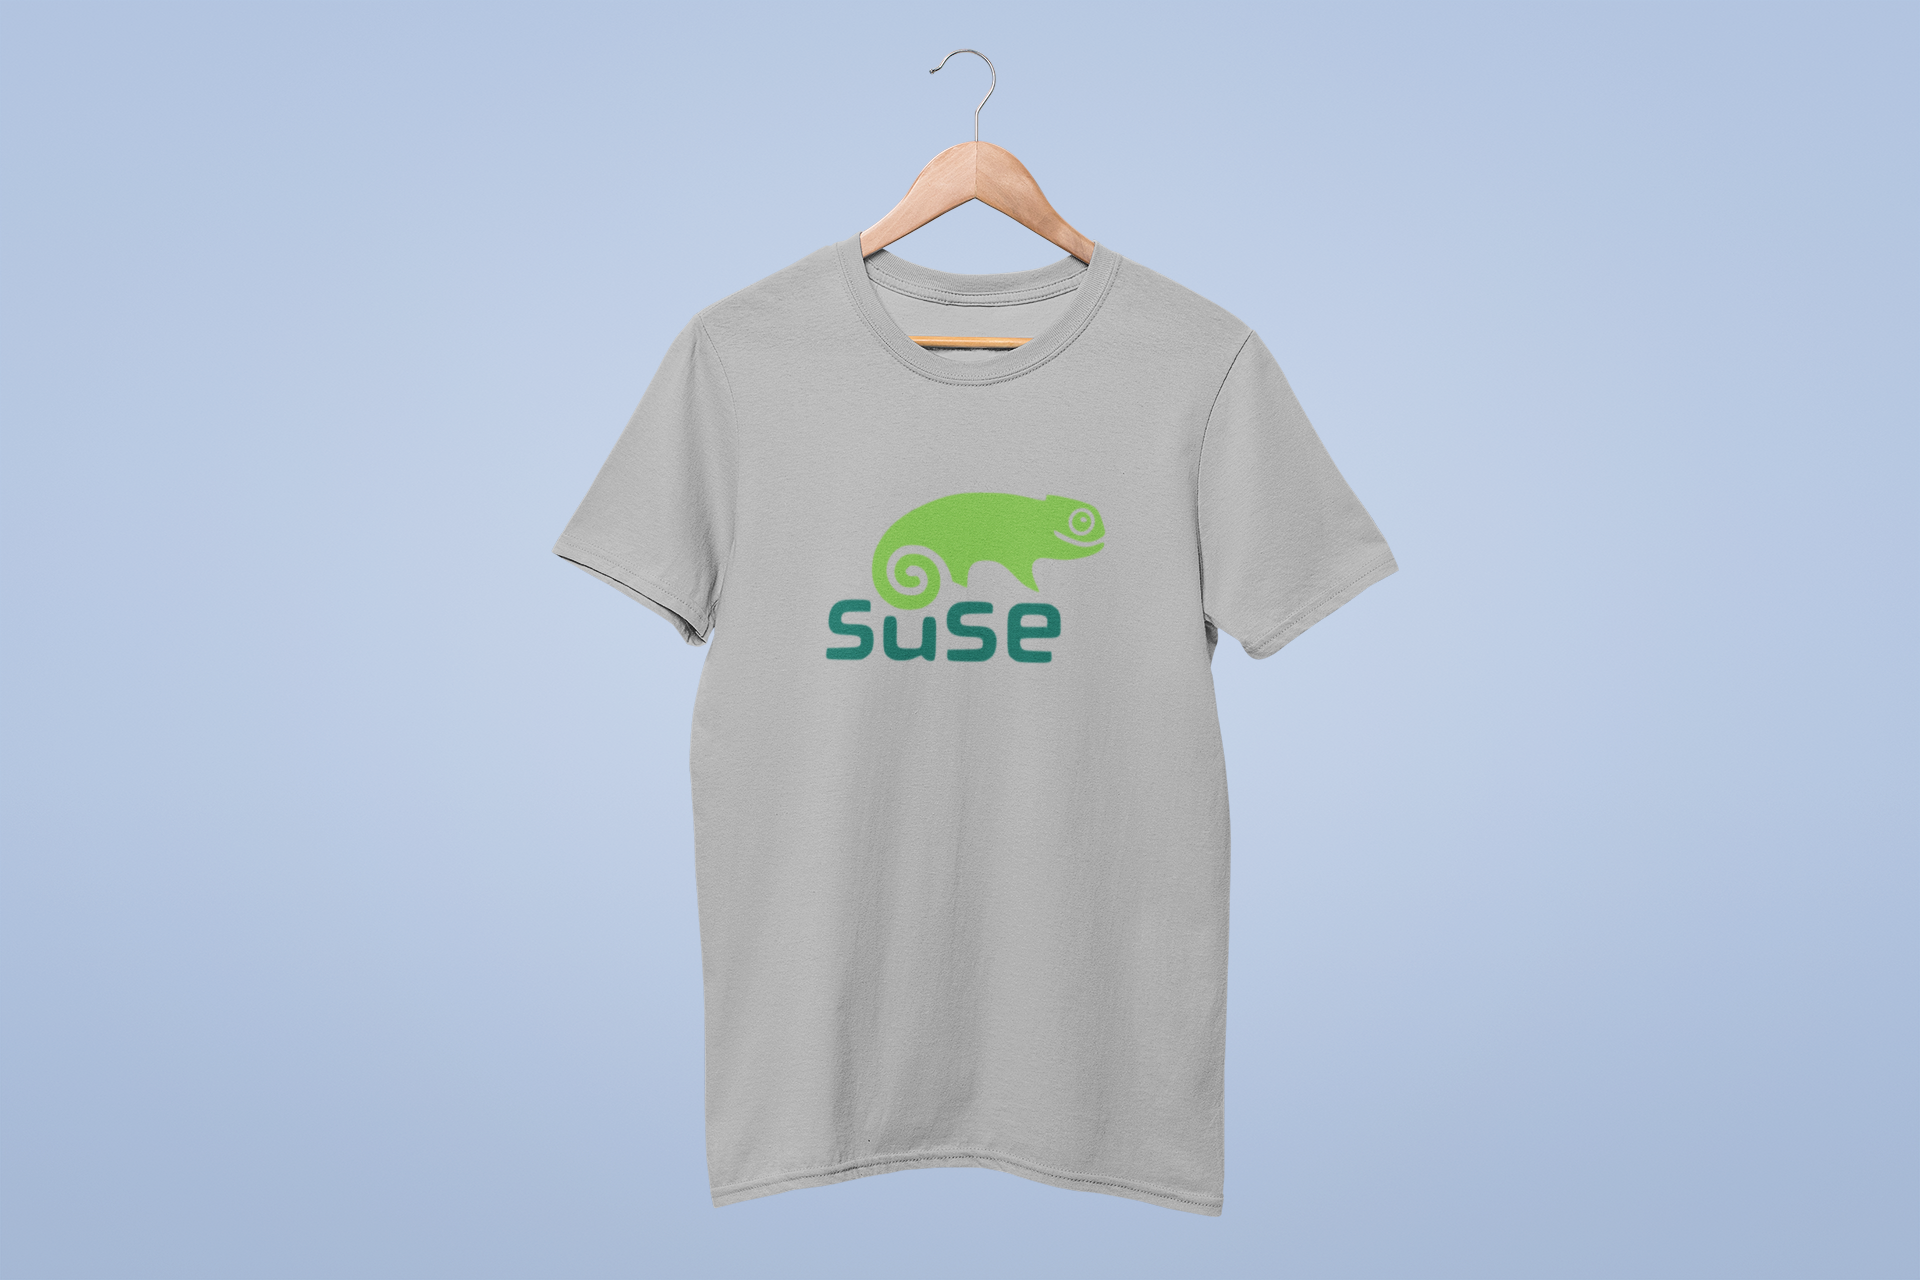 Opensuse T-Shirts for Sale